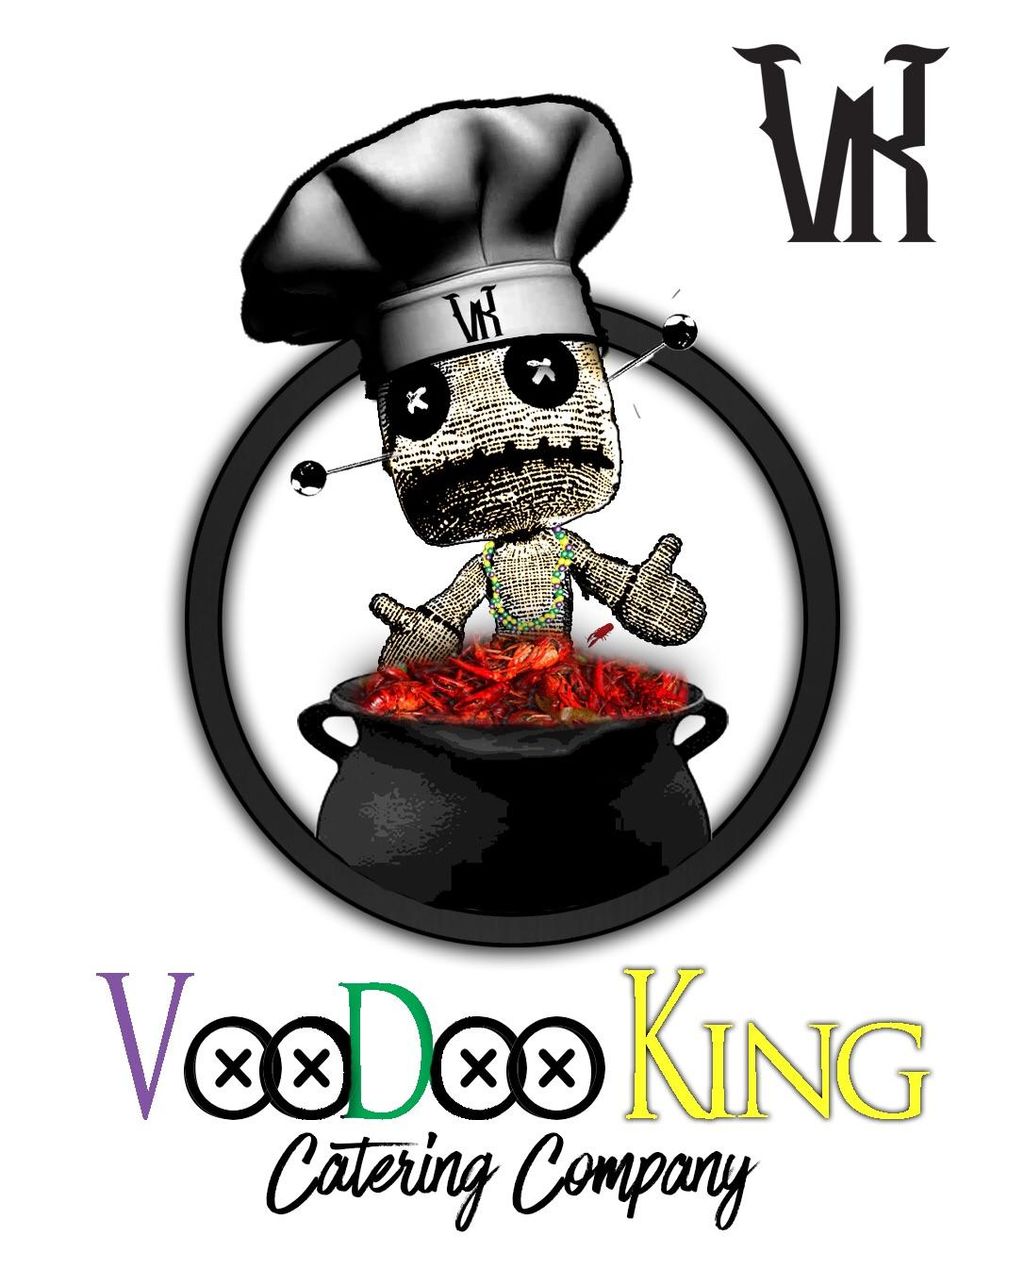 Voodoo King Catering Company